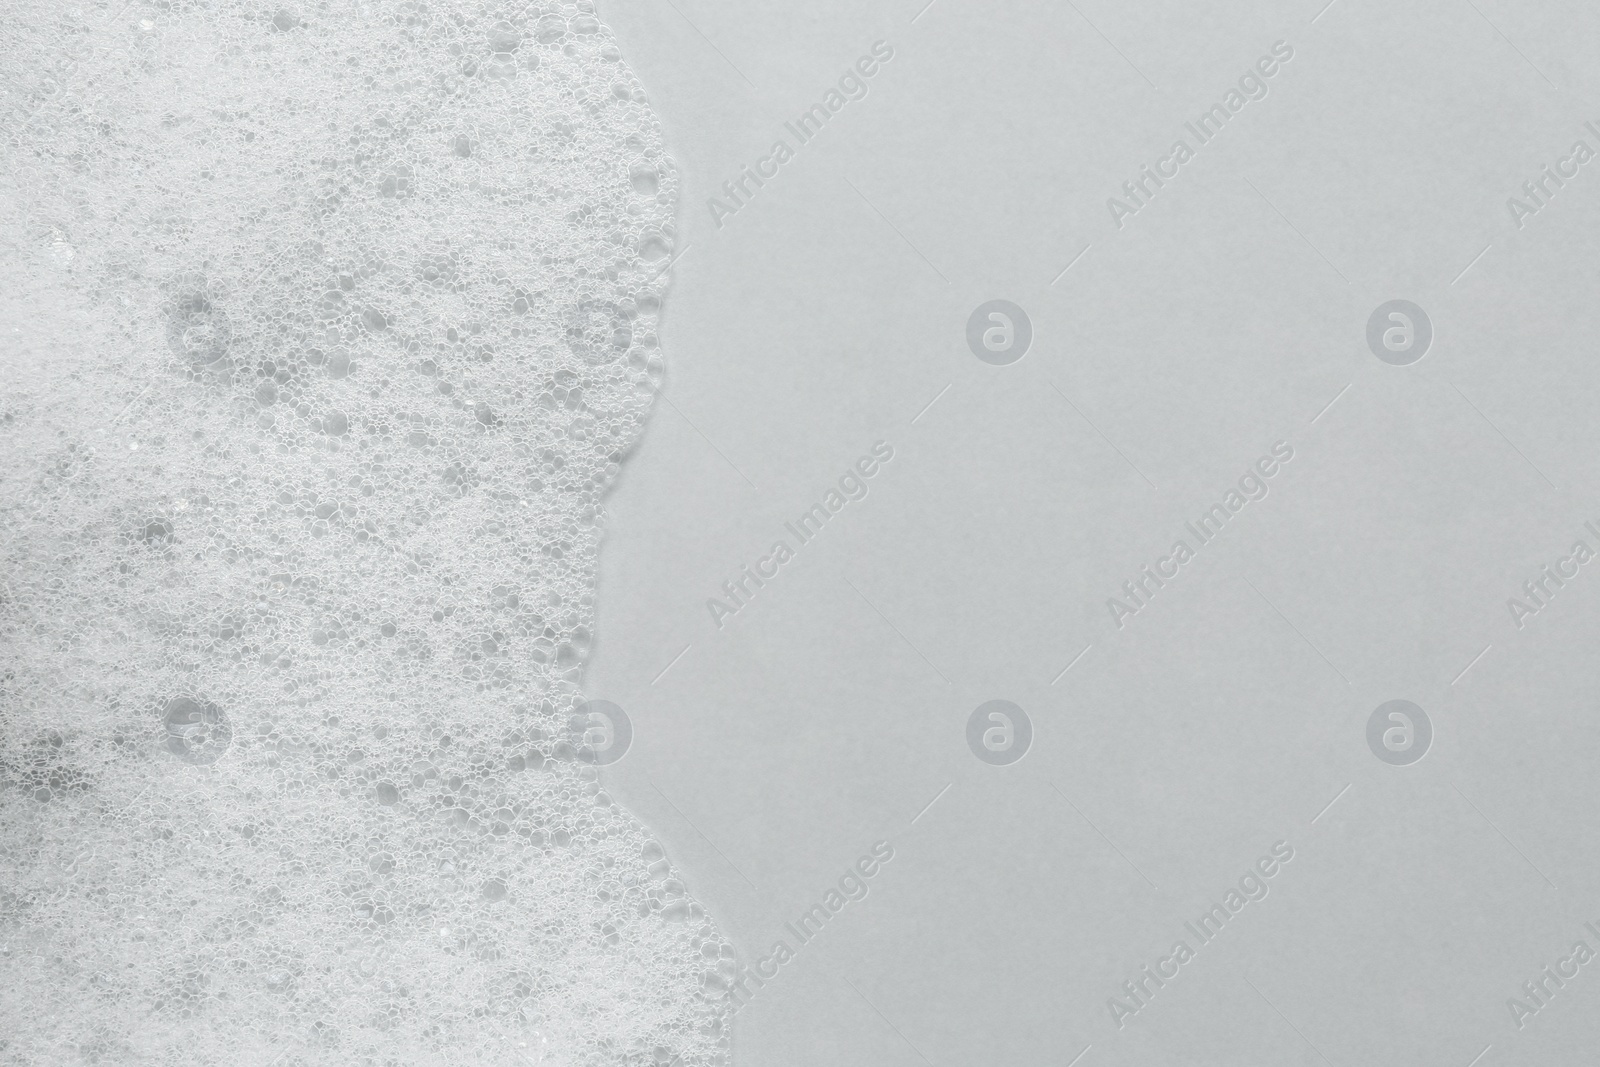 Photo of Fluffy bath foam on light background, top view. Space for text